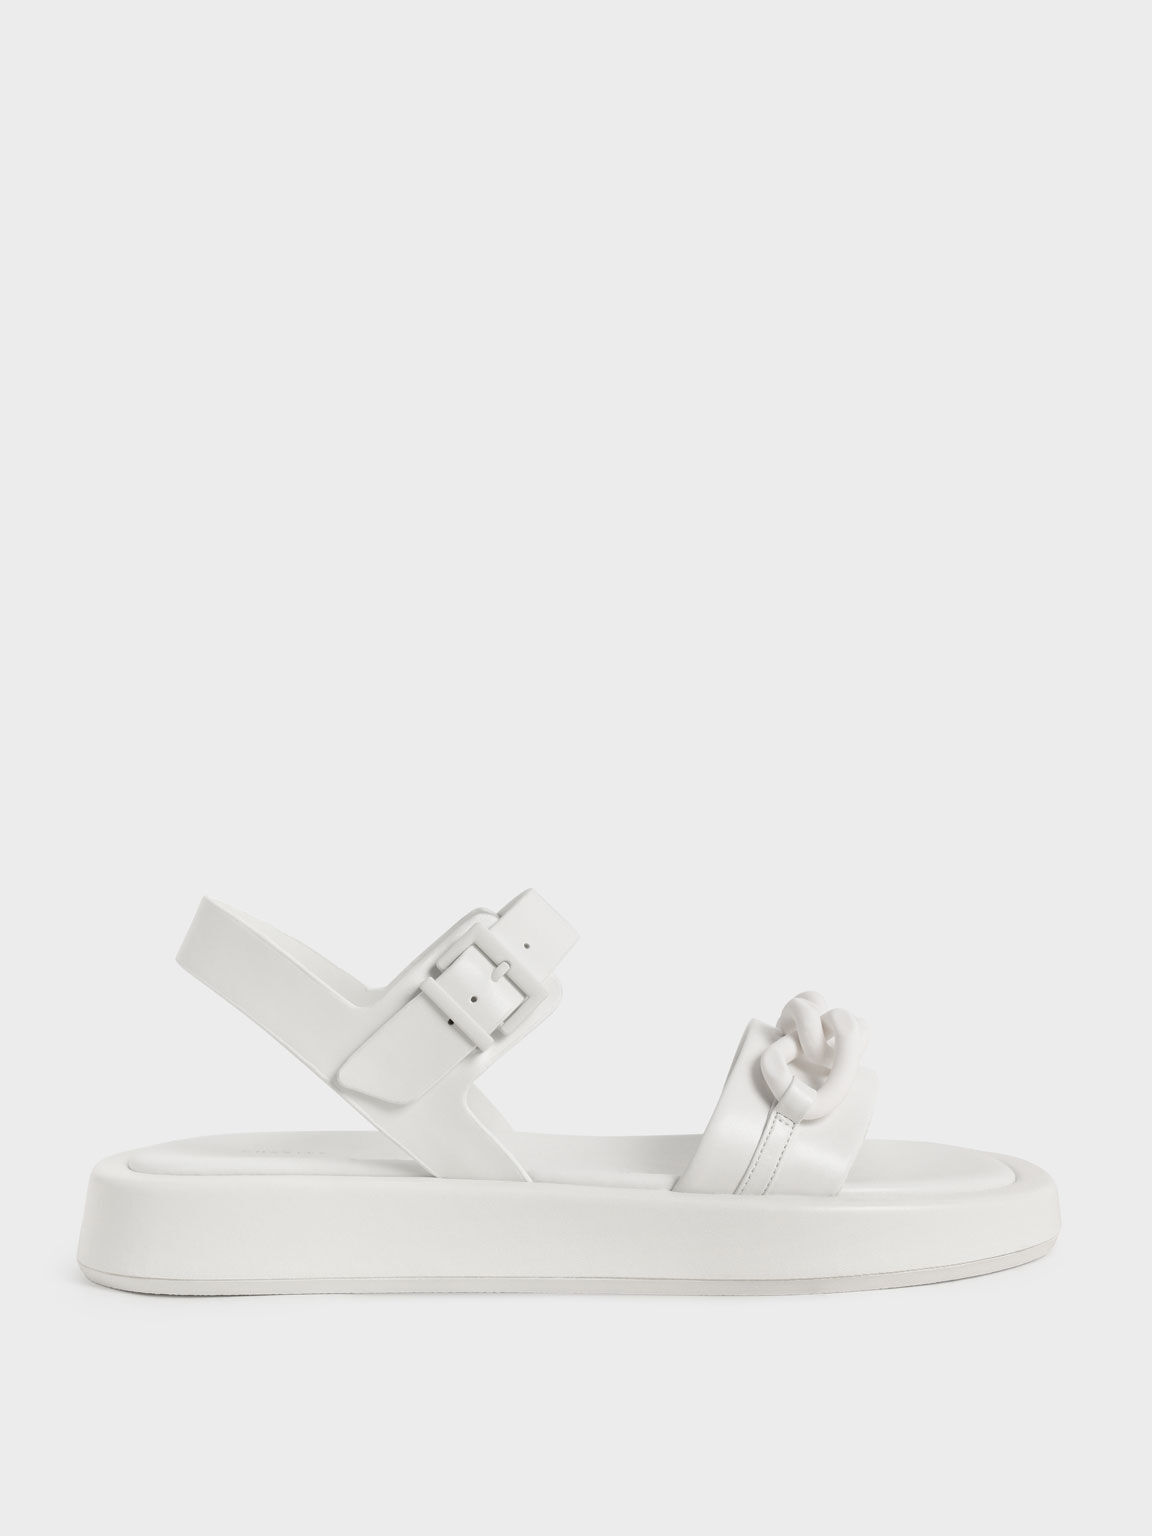 Women's Sandals | Shop Exclusive Styles - CHARLES & KEITH SG